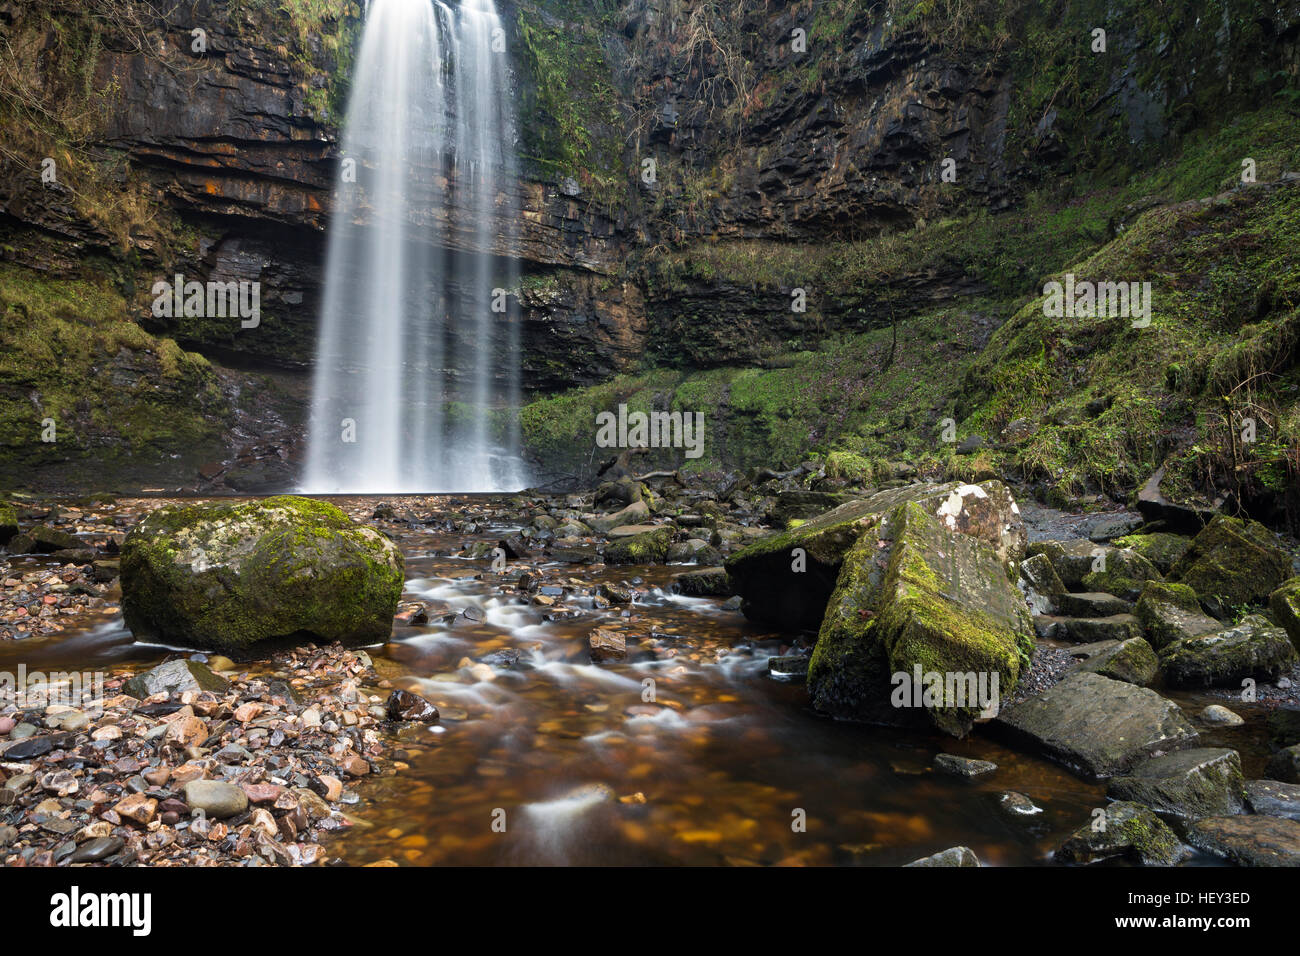 Henrhyd Falls, Sgwd Henrhyd, is the highest waterfall in South Wales. The Nant Llech drops over the hard sandstone known as Farewell Rock. Stock Photo